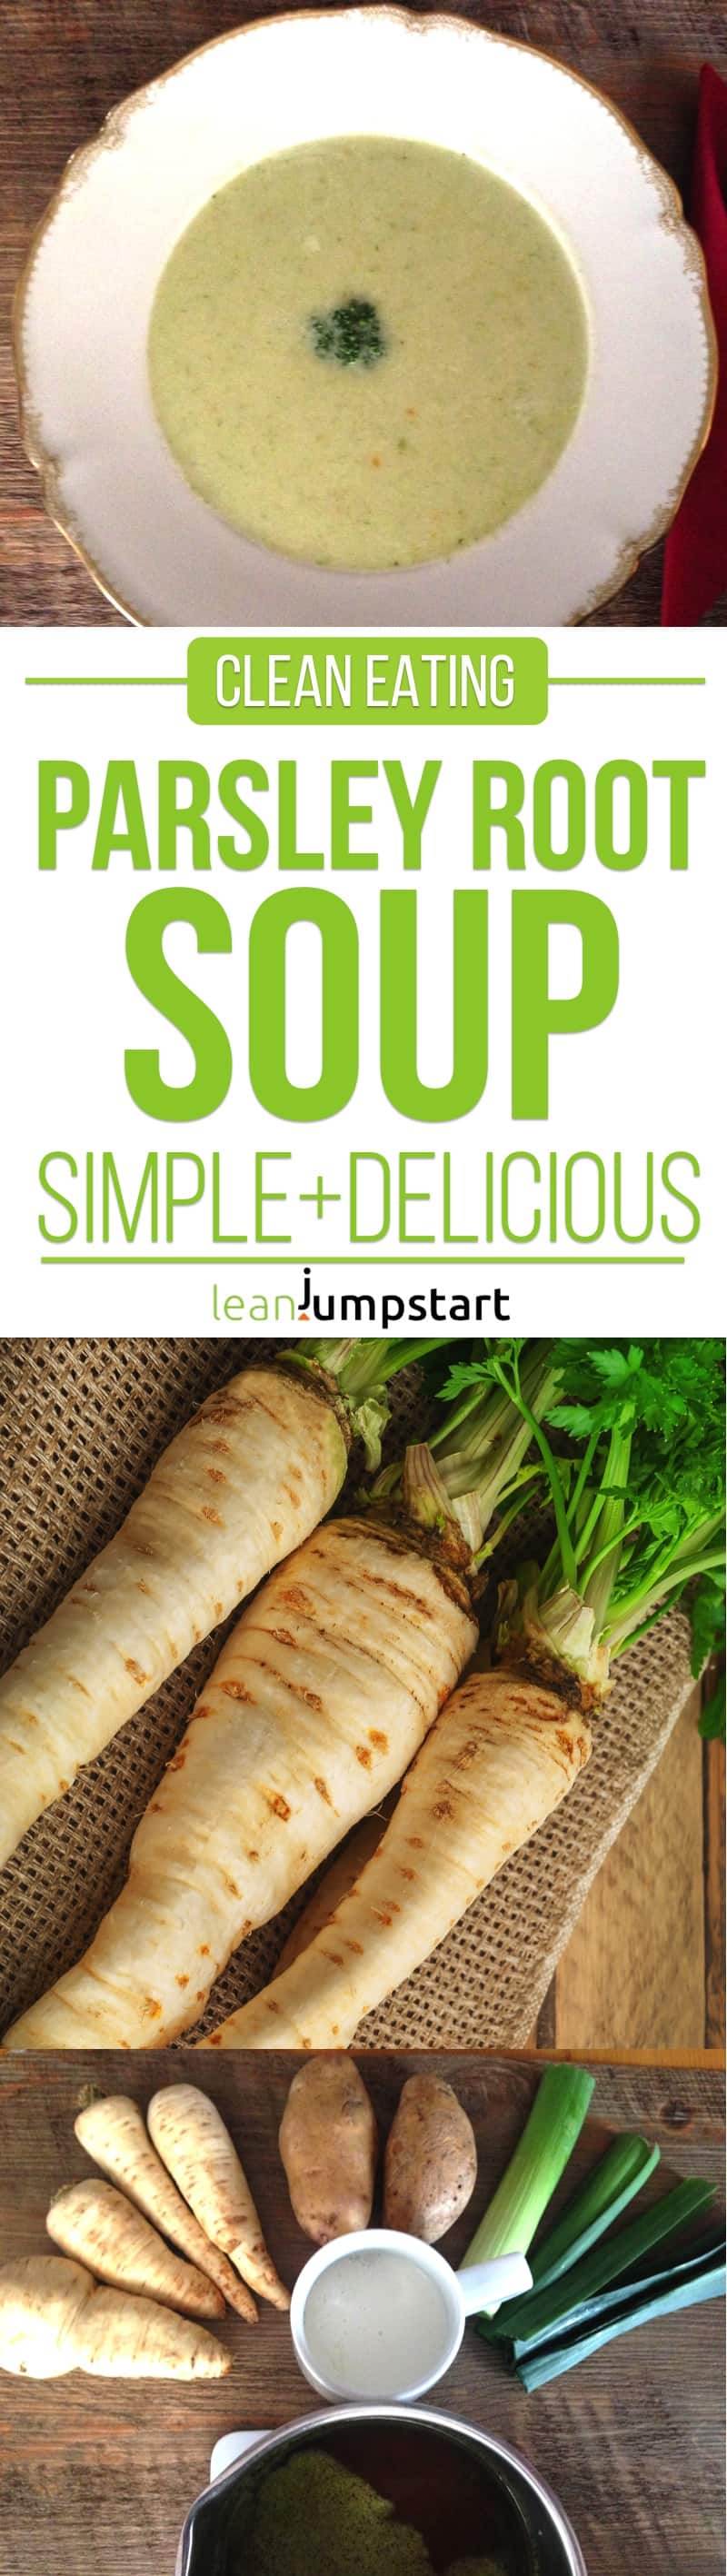 parsley root soup: a quick and easy clean eating soup recipe for weight management